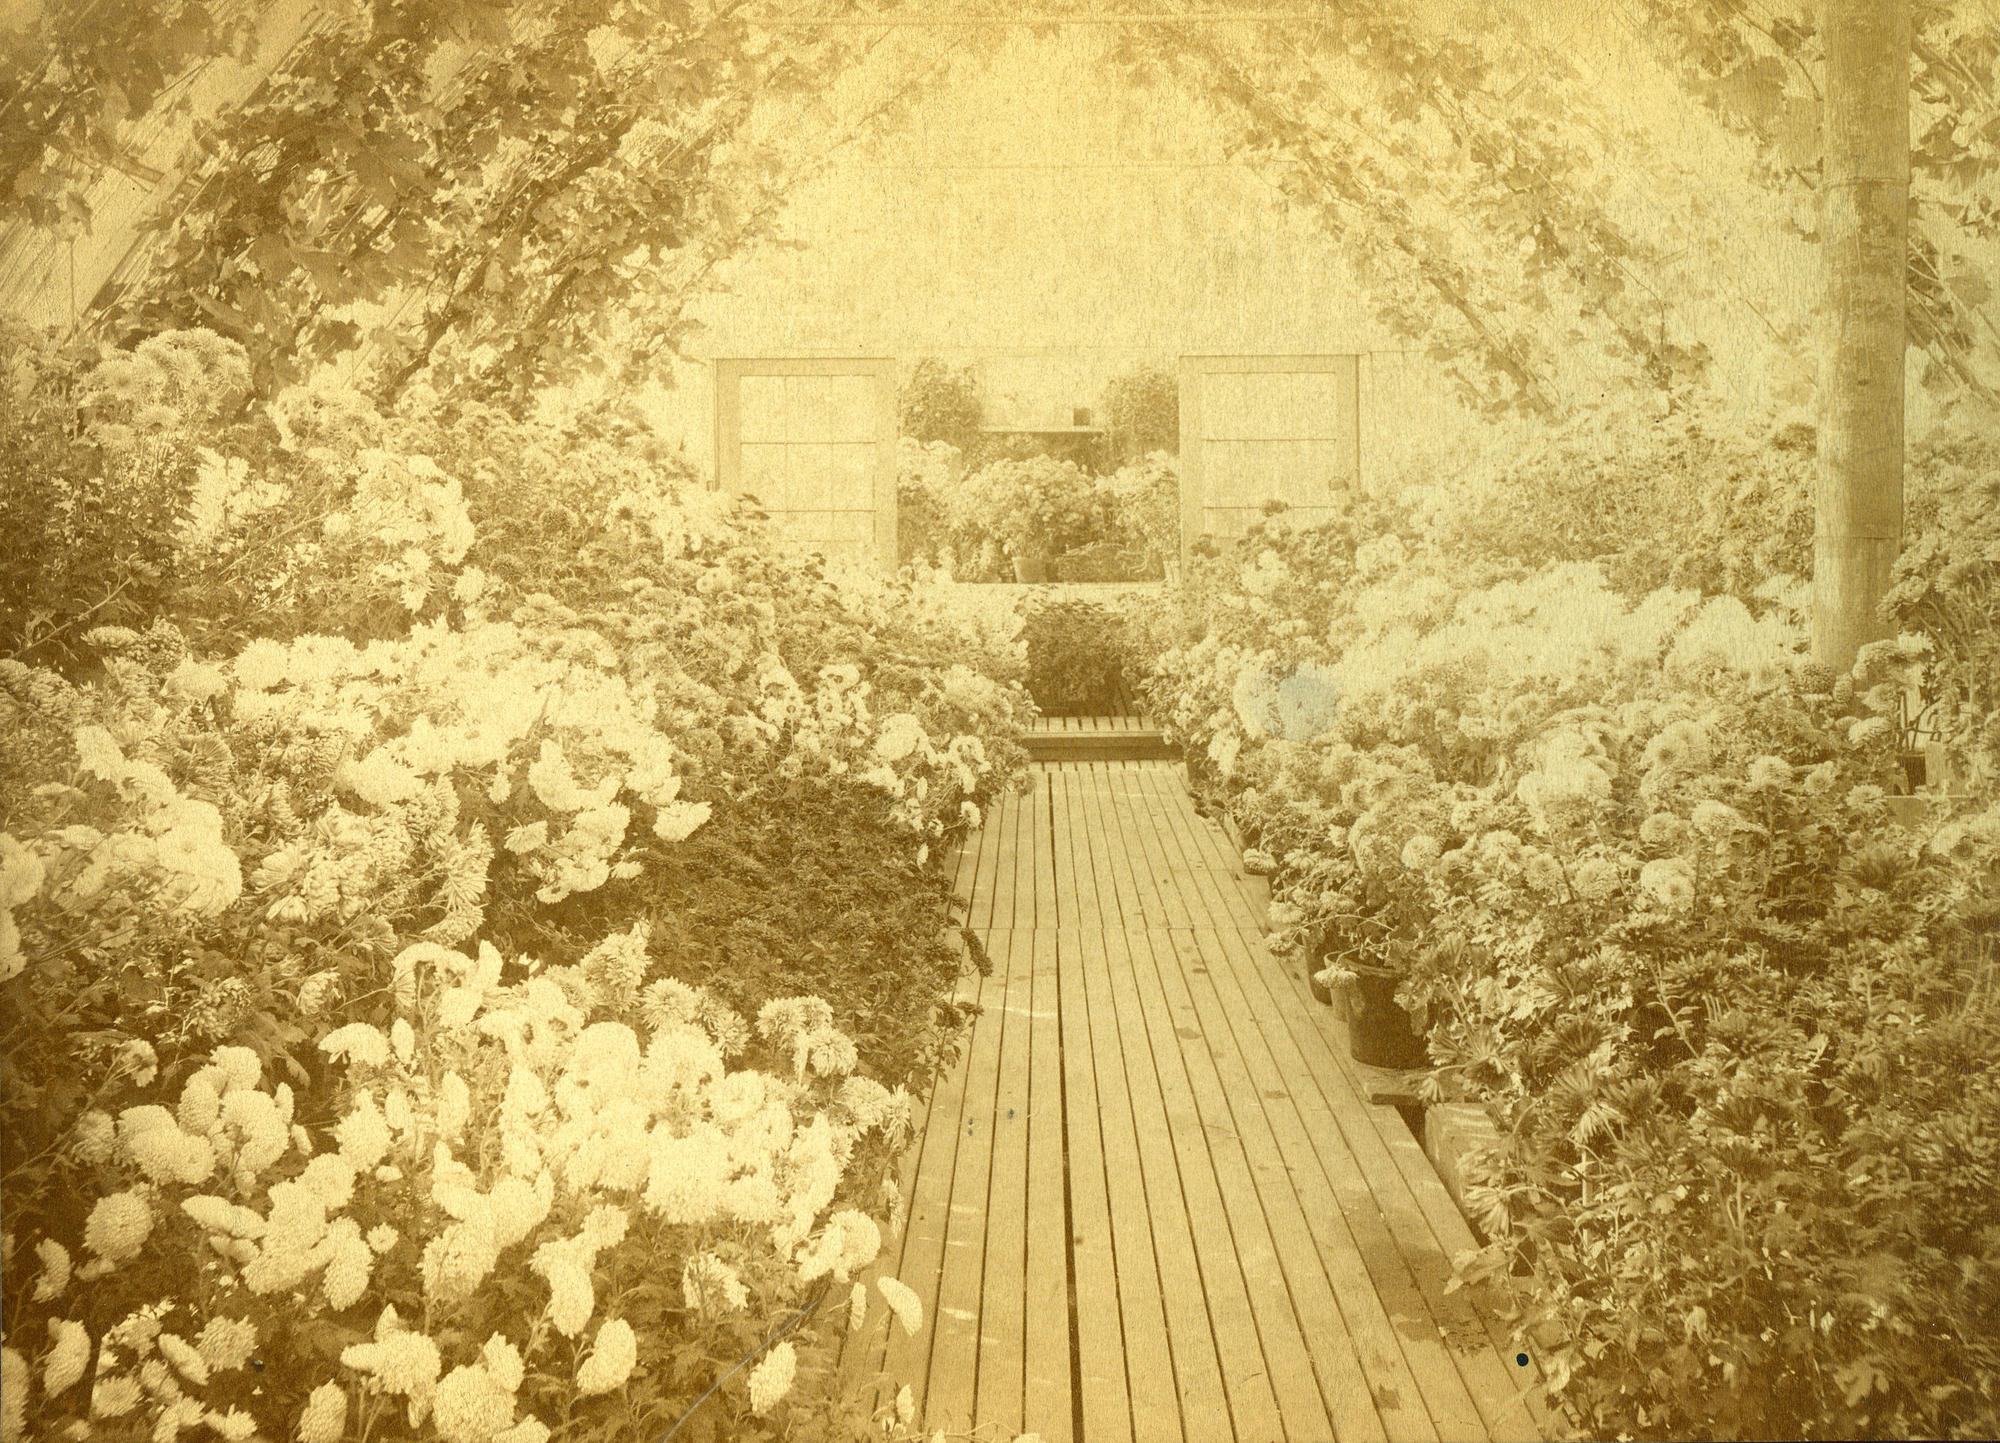 Chrysanthemums in Isabella’s greenhouse at Green Hill, 1884. Photo: Wilfred A. French (active eastern Massachusetts, 1880-1889).